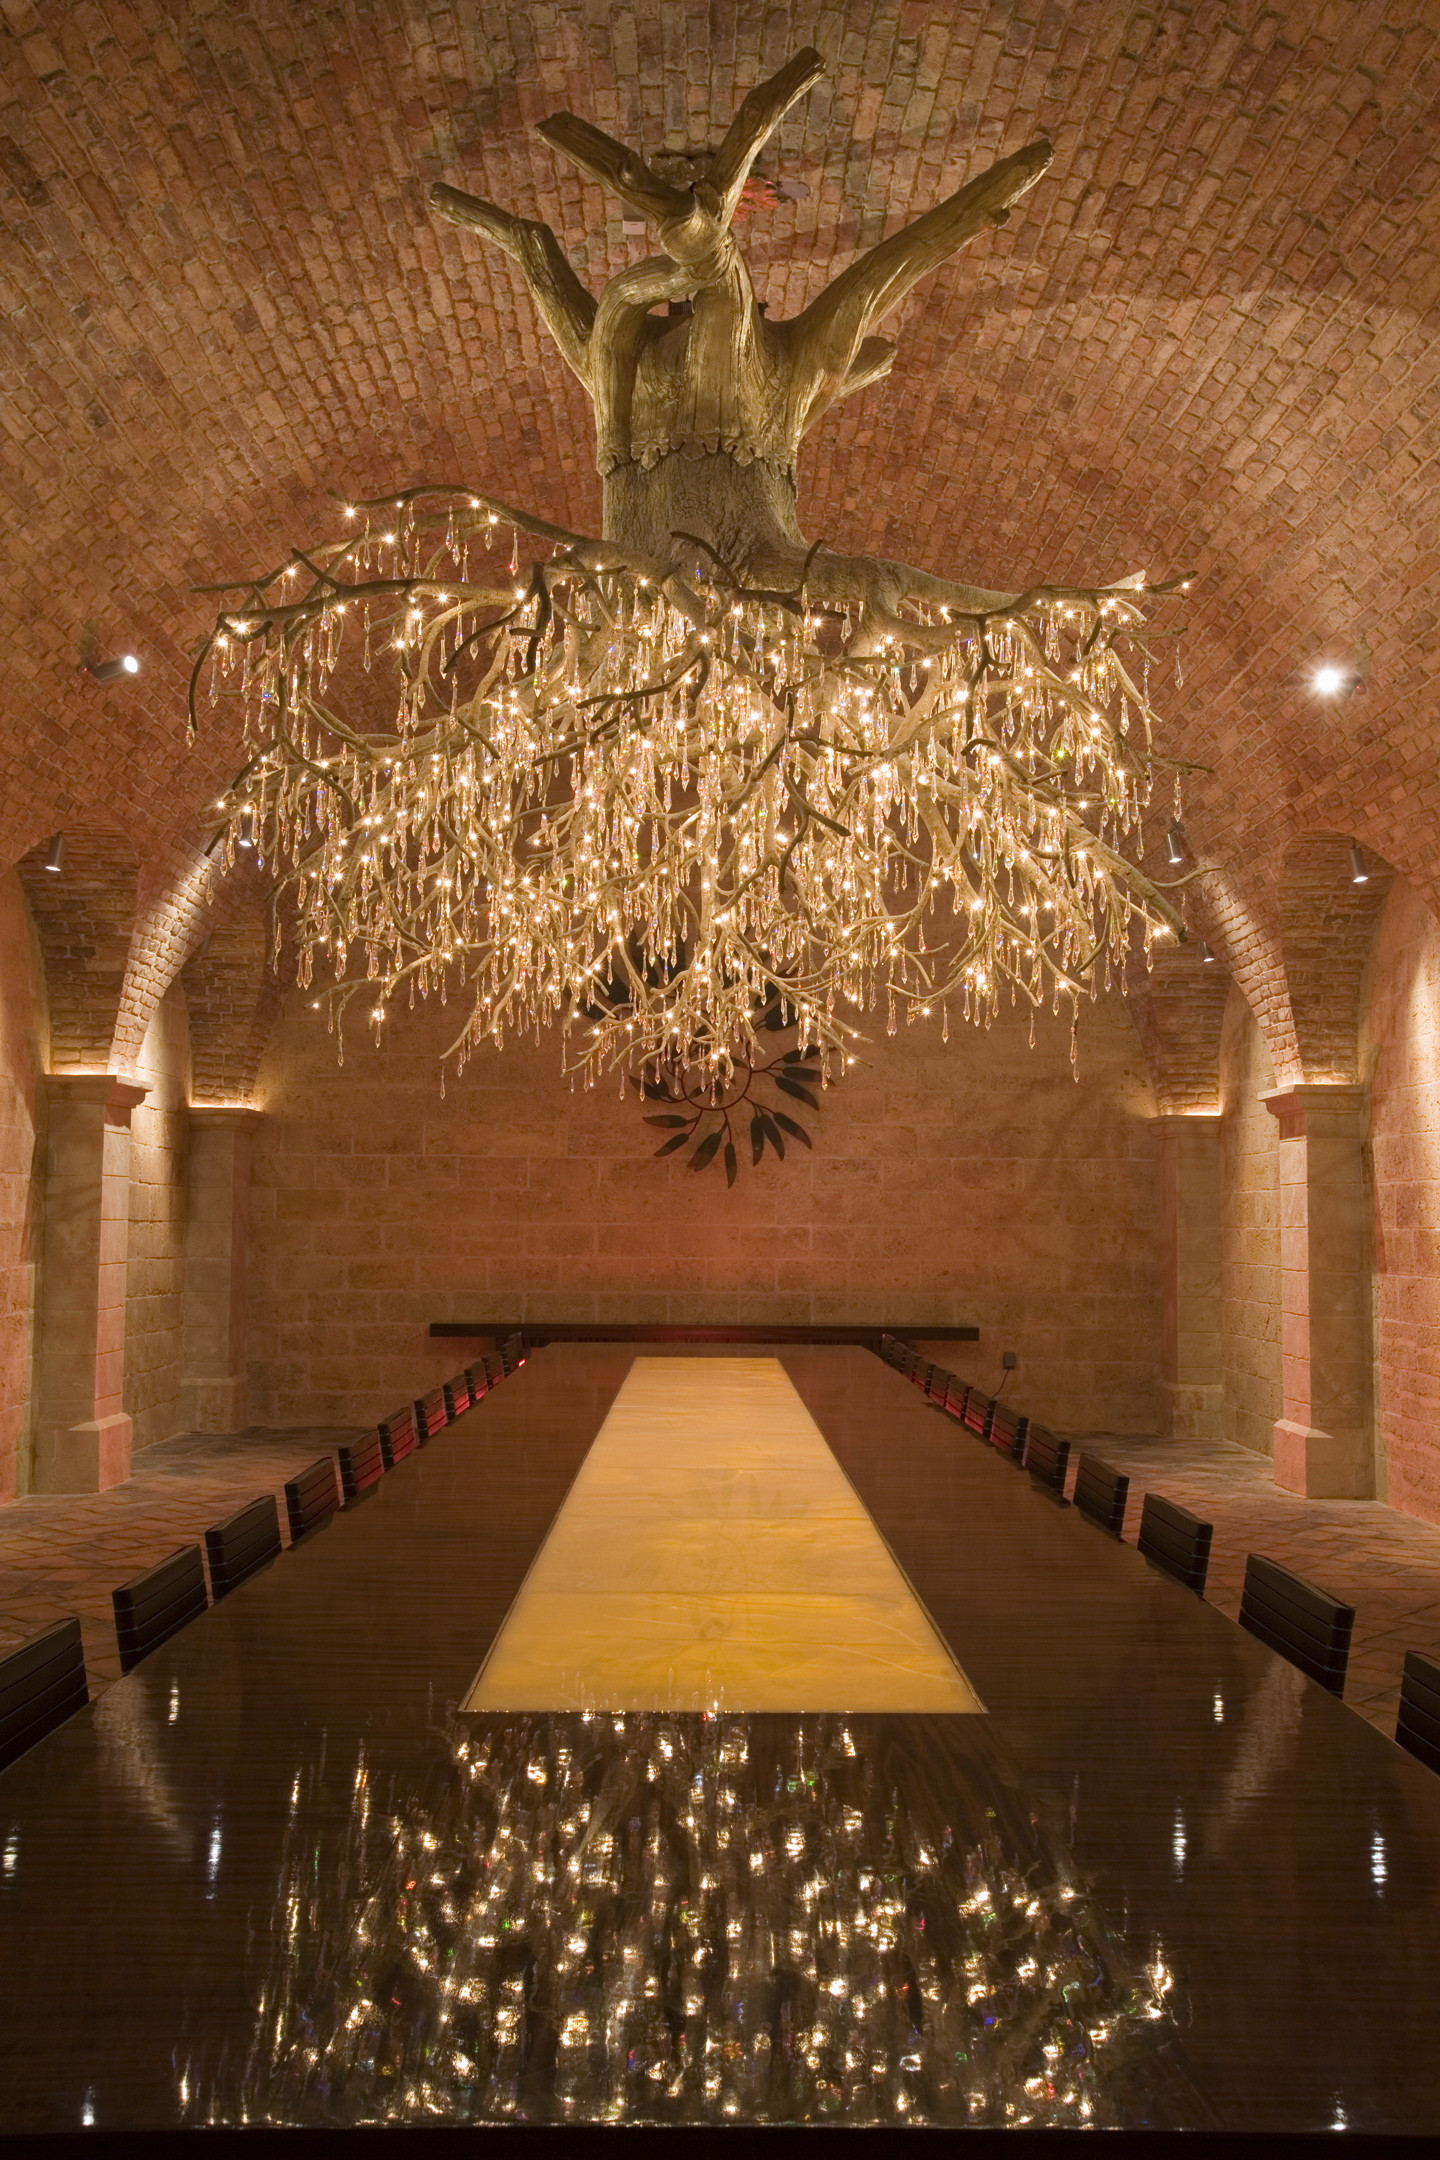 Tasting room at a California winery complete with grapevine root chandelier